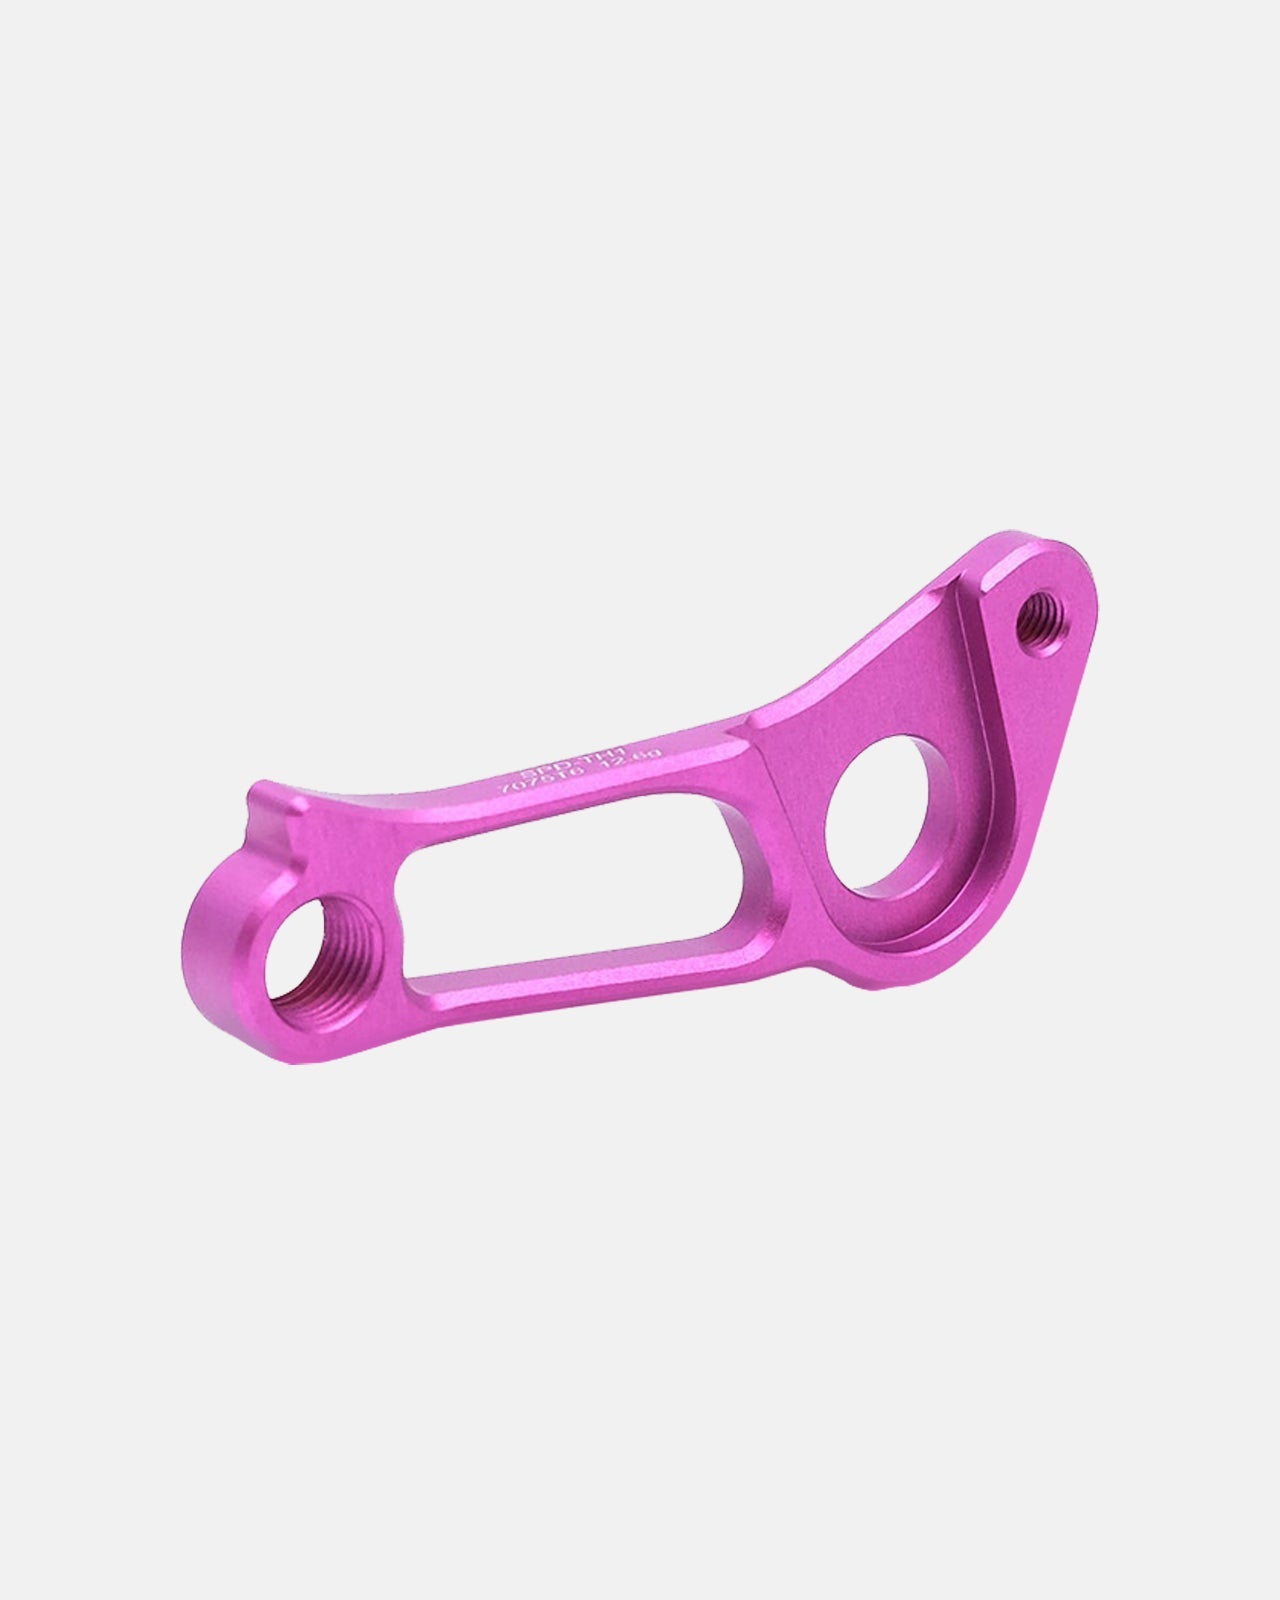 Sigeyi Specialized Direct-Mount Derailleur Hanger - Pink